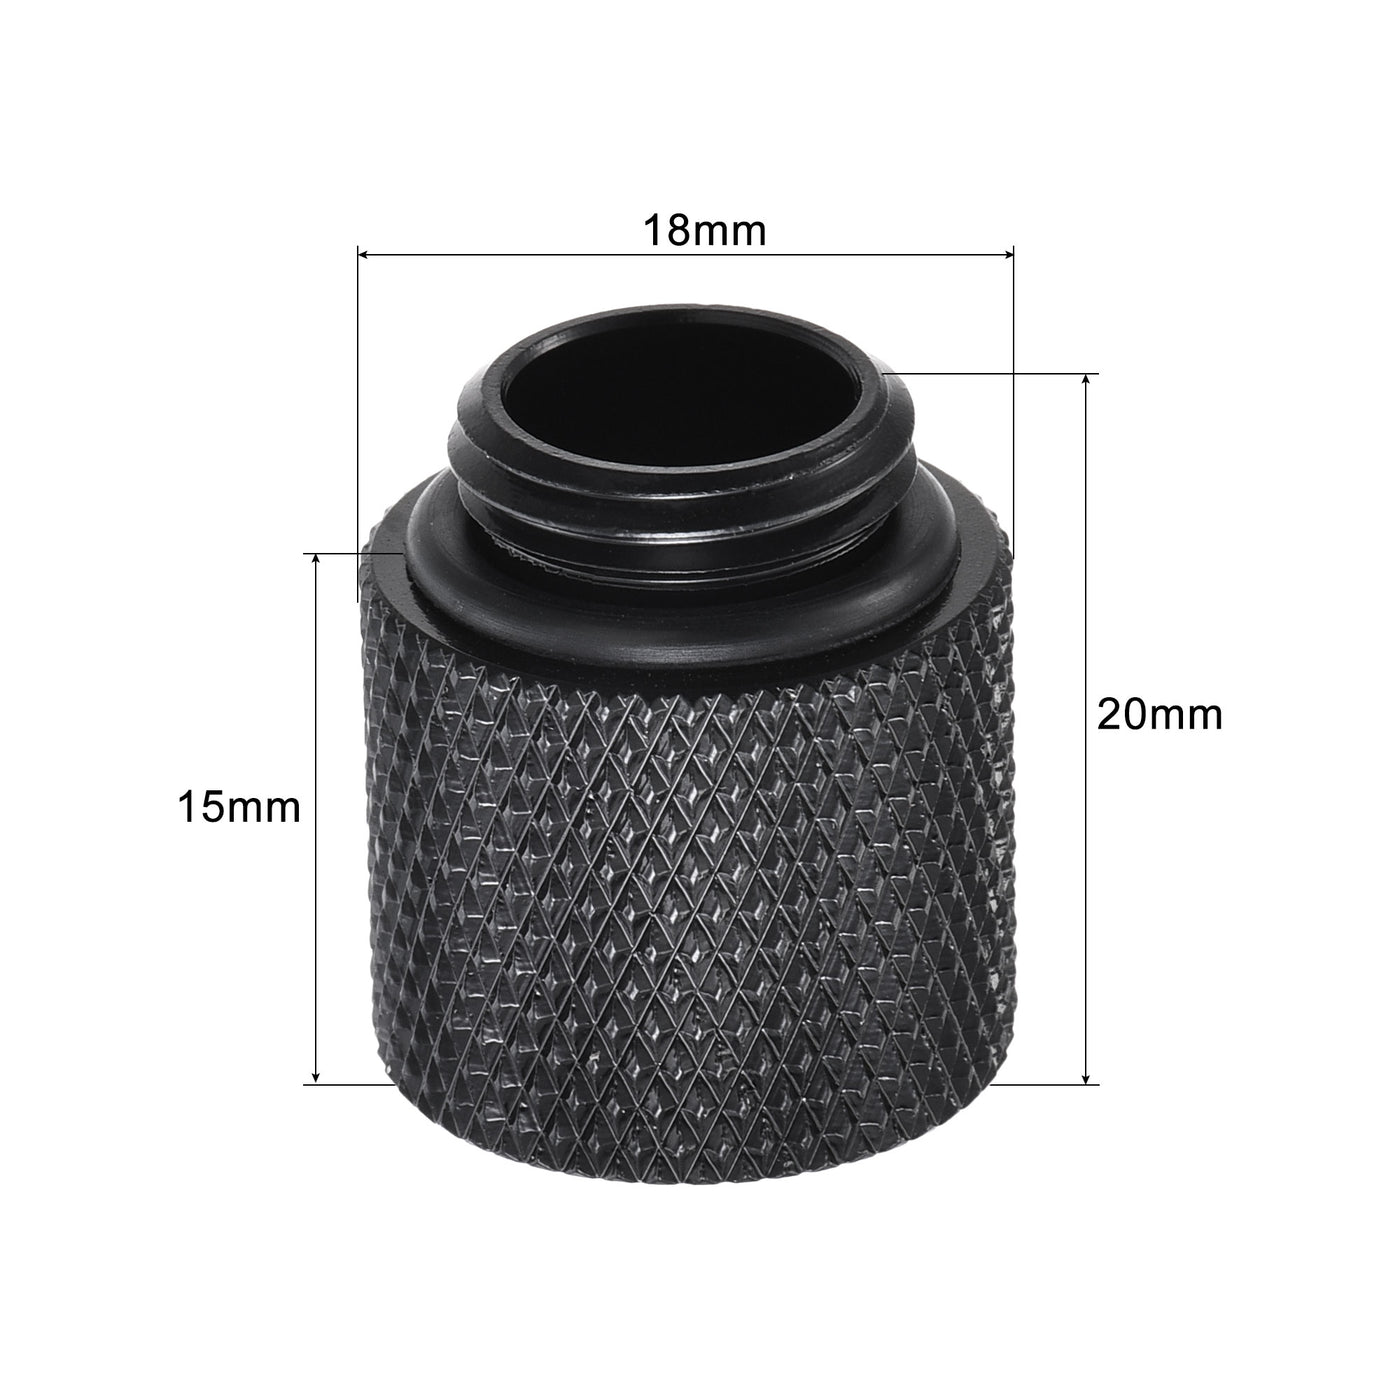 uxcell Uxcell Male to Female Extender Fitting G1/4 x 15mm for Water Cooling System Black 4pcs